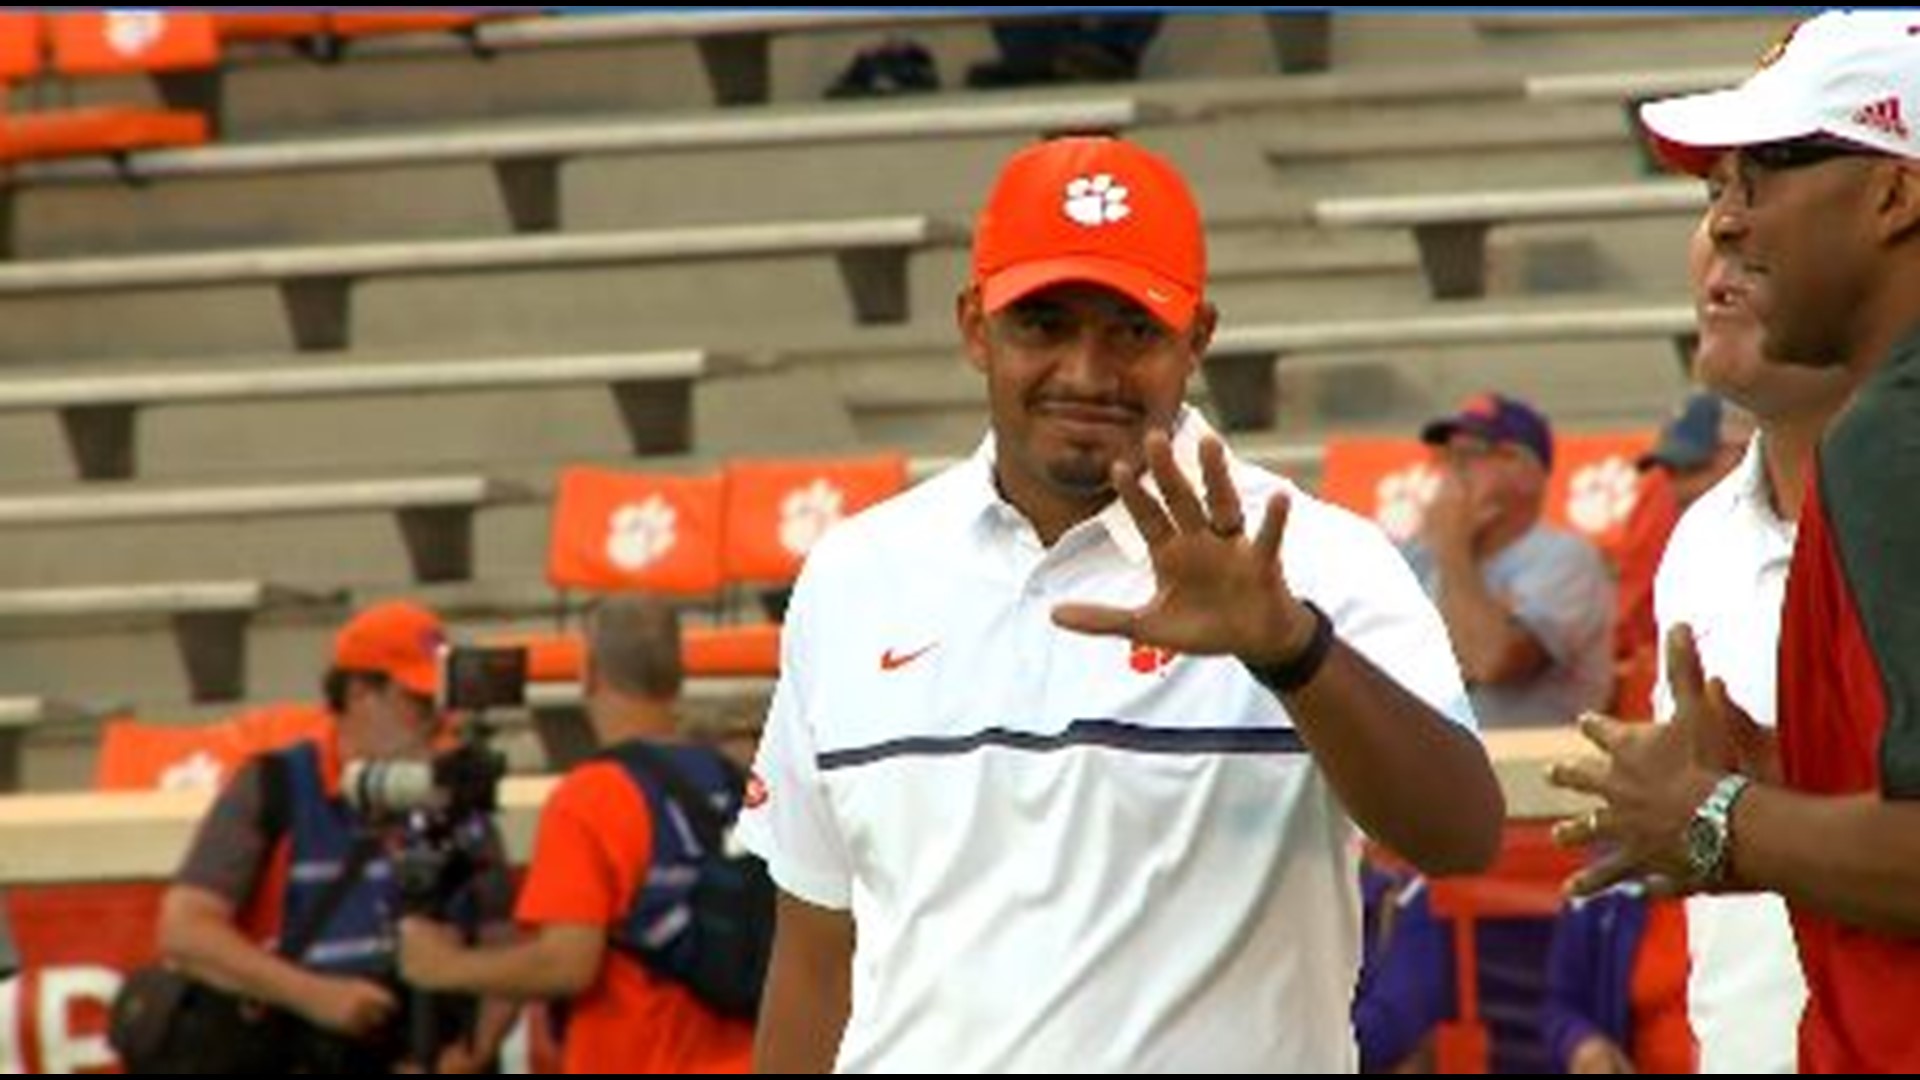 Locked On ACC podcast host Candace Cooper joins us to discuss Clemson Offensive Coordinator Tony Elliott and his chances of being the next Head Coach at Virginia.